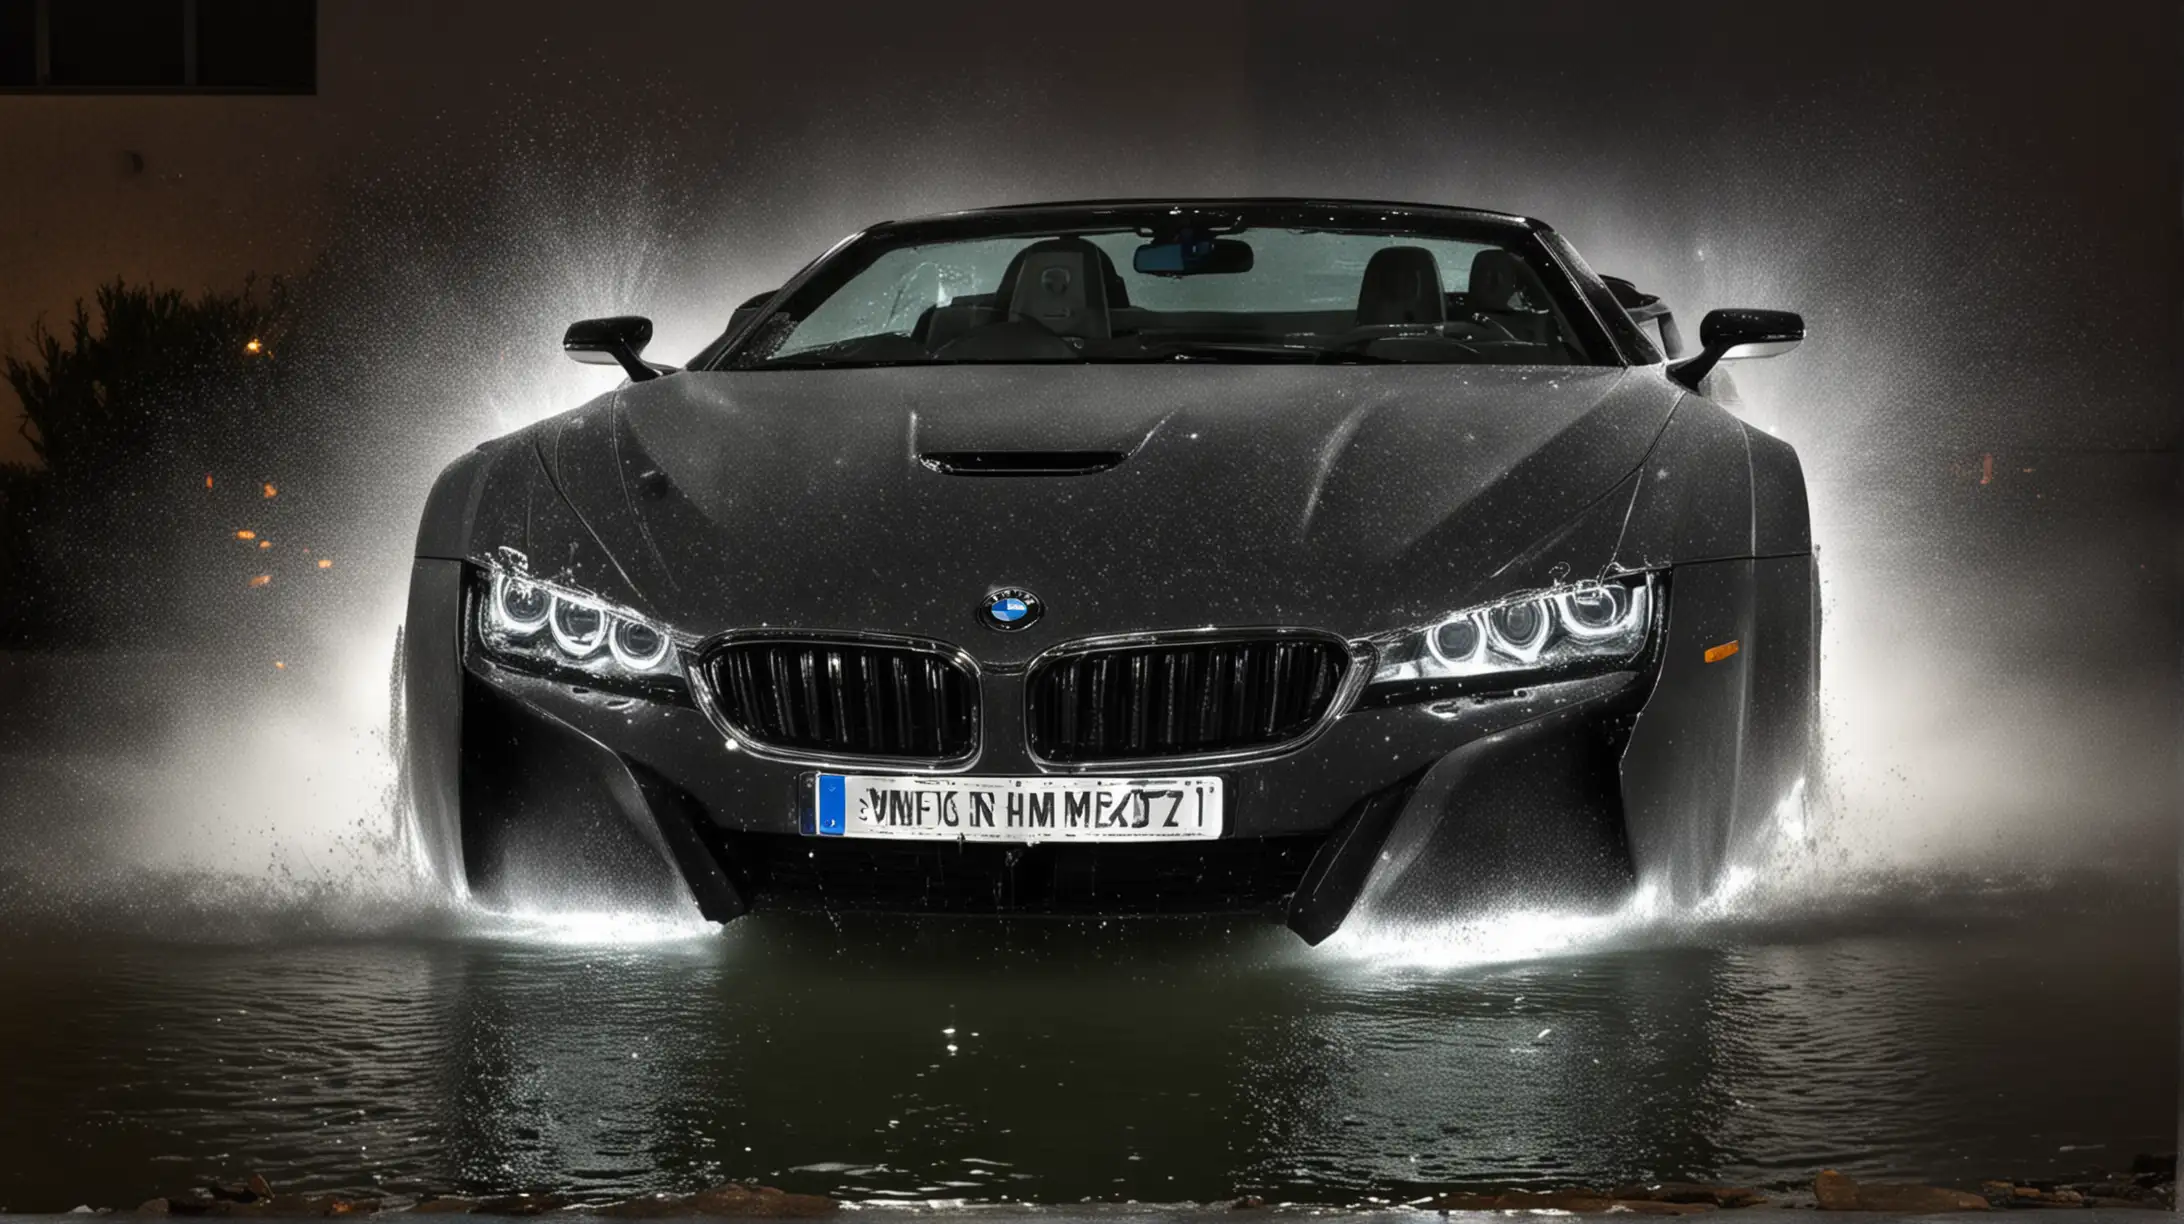 Luxurious BMW CarShaped Jacuzzi with Glowing Headlights